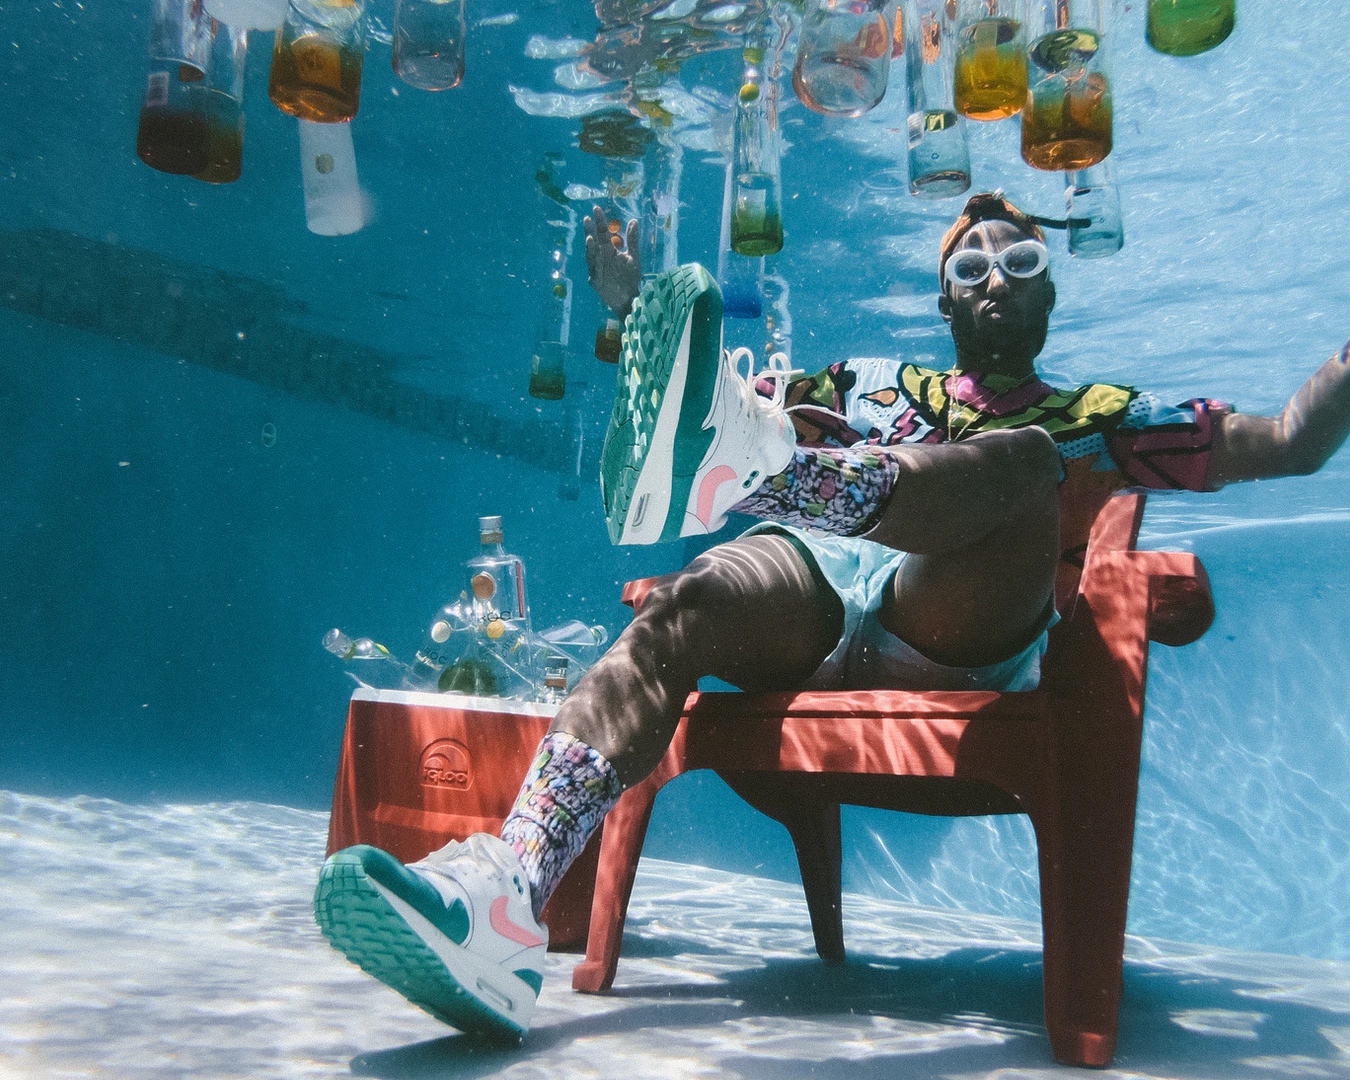 Man underwater sitting on a chair surrounded by floating bottles.